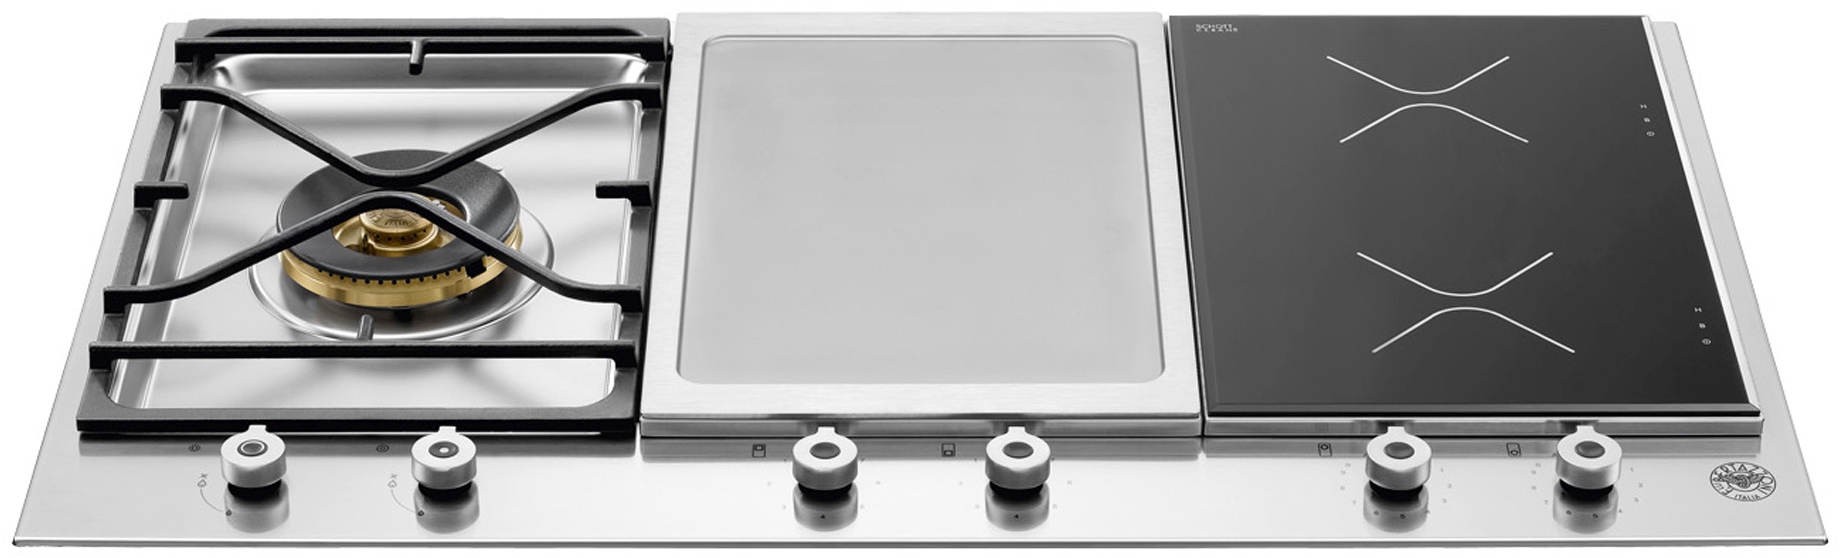 Bertazzoni Professional Series 36" Stainless Steel Electric Cooktop